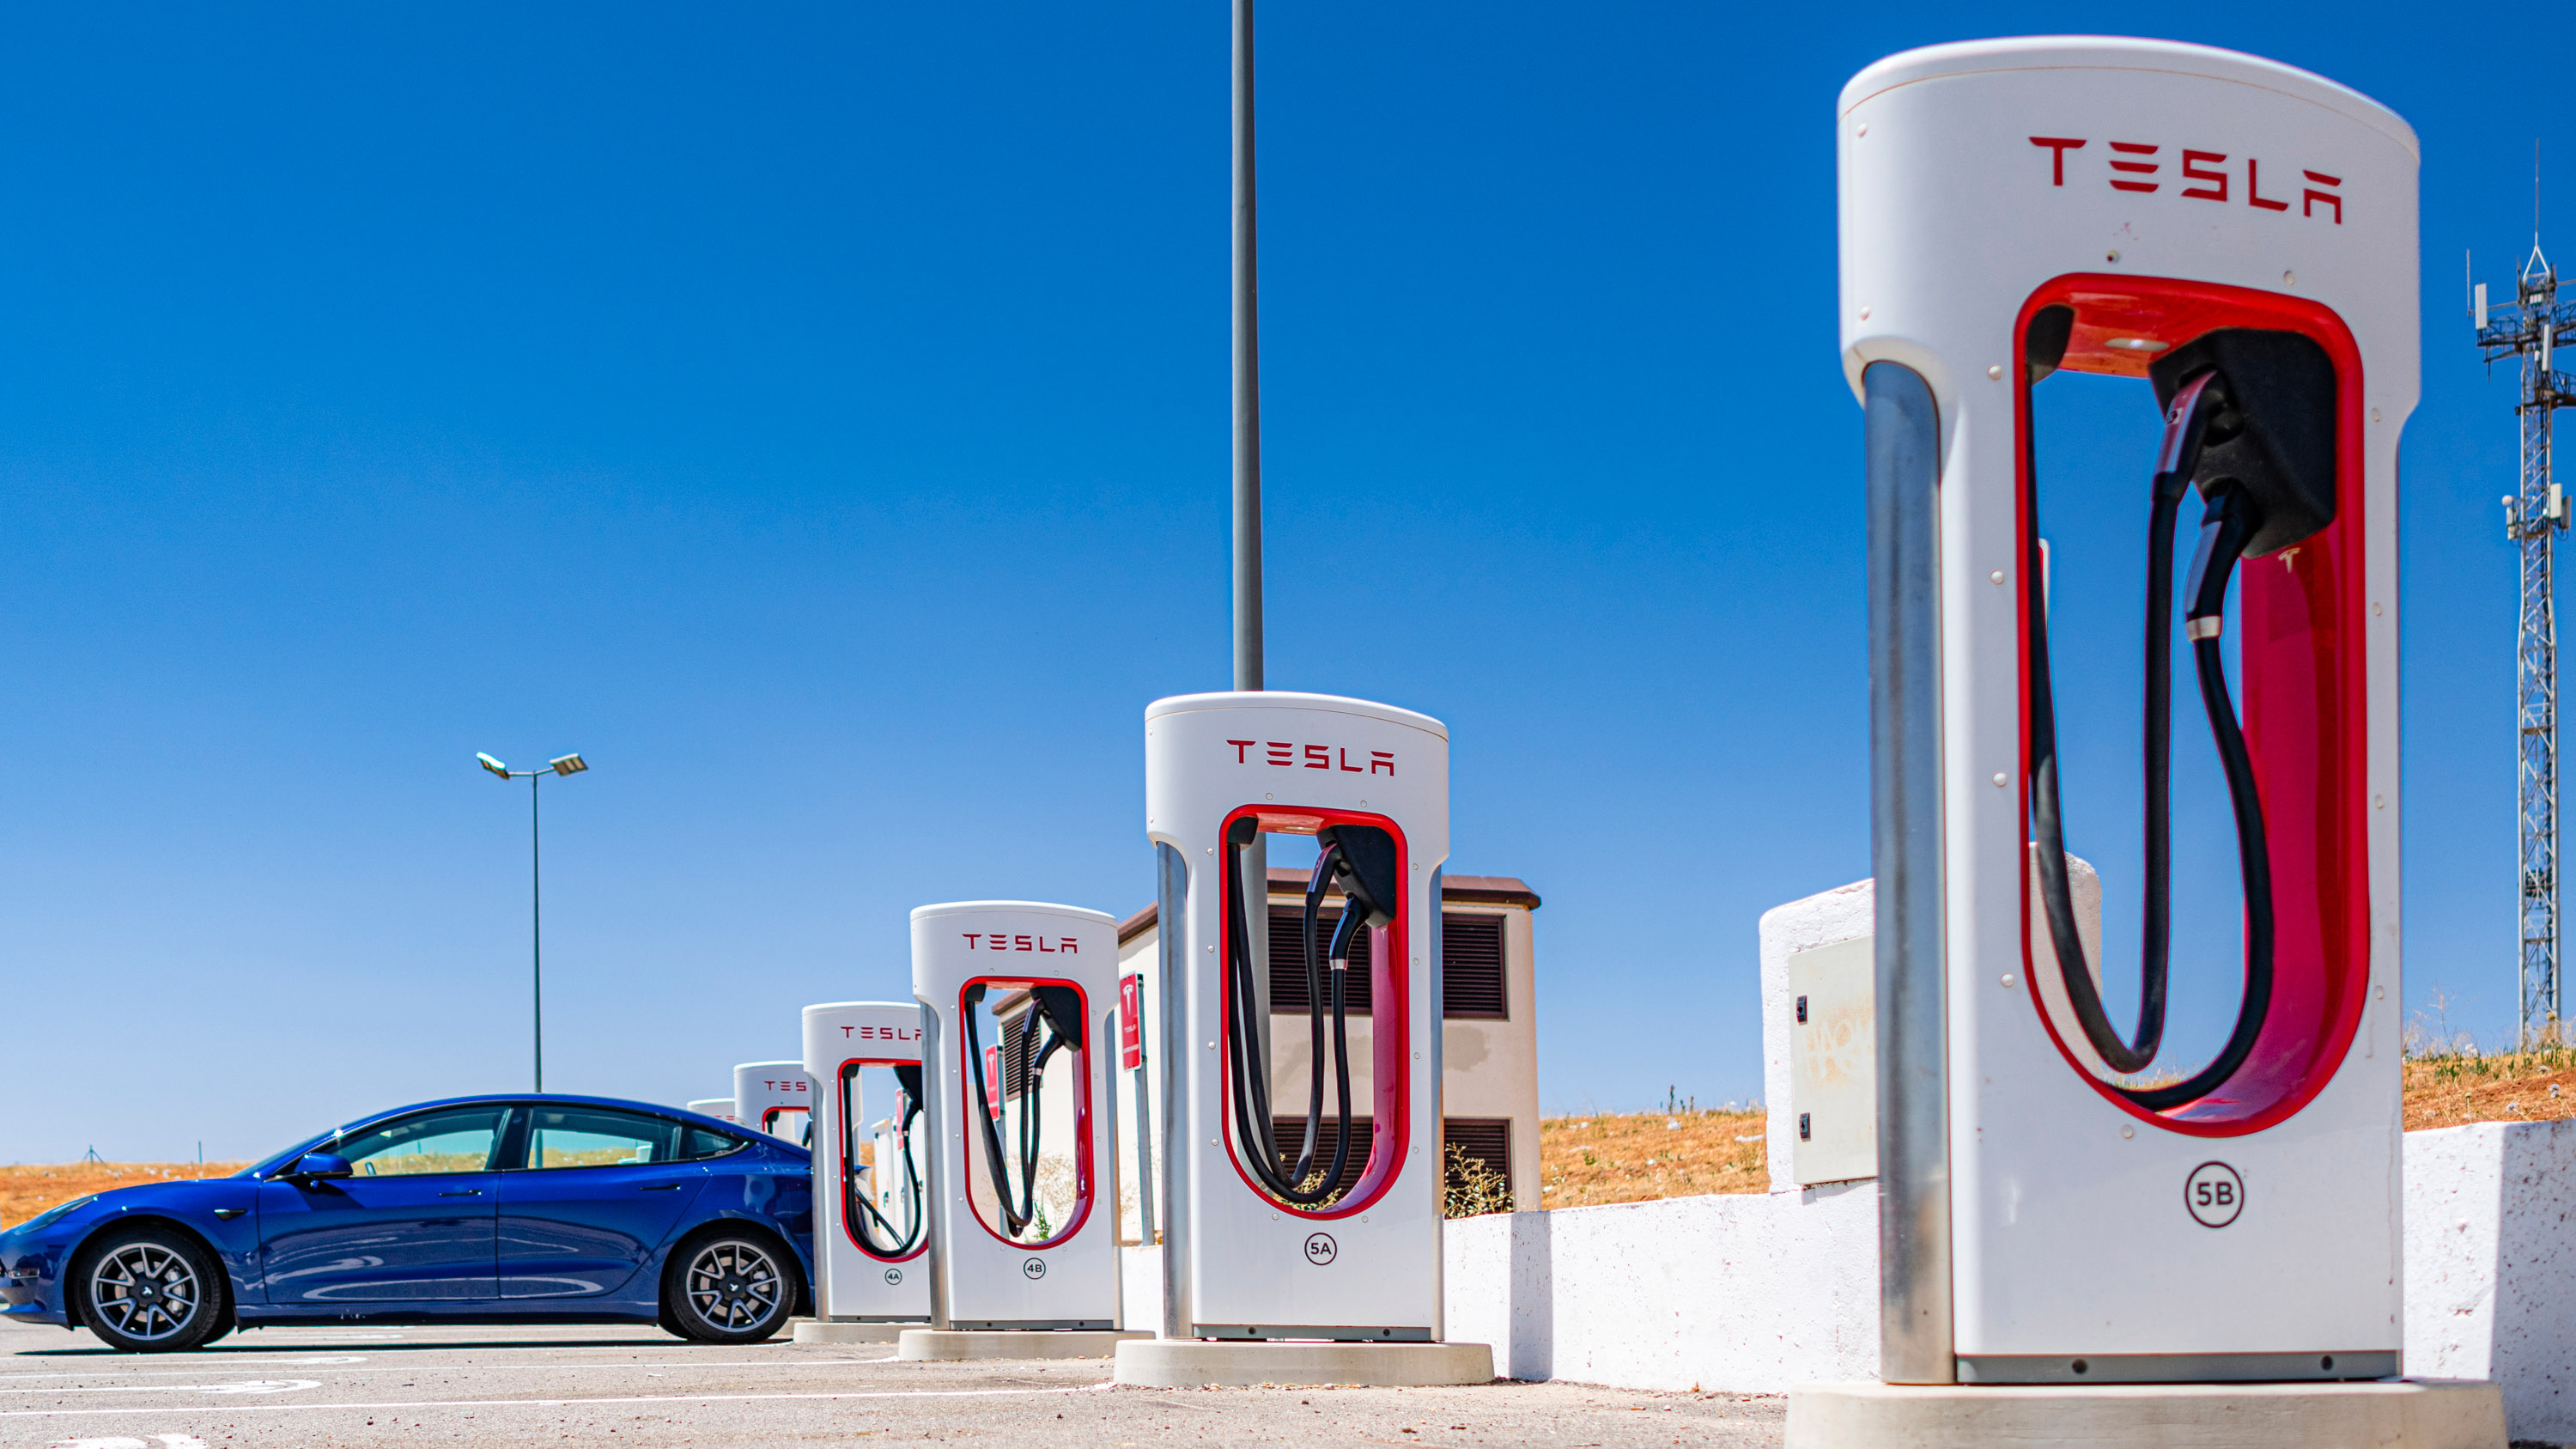 In the clash of the EV chargers, it's Tesla vs. everyone else